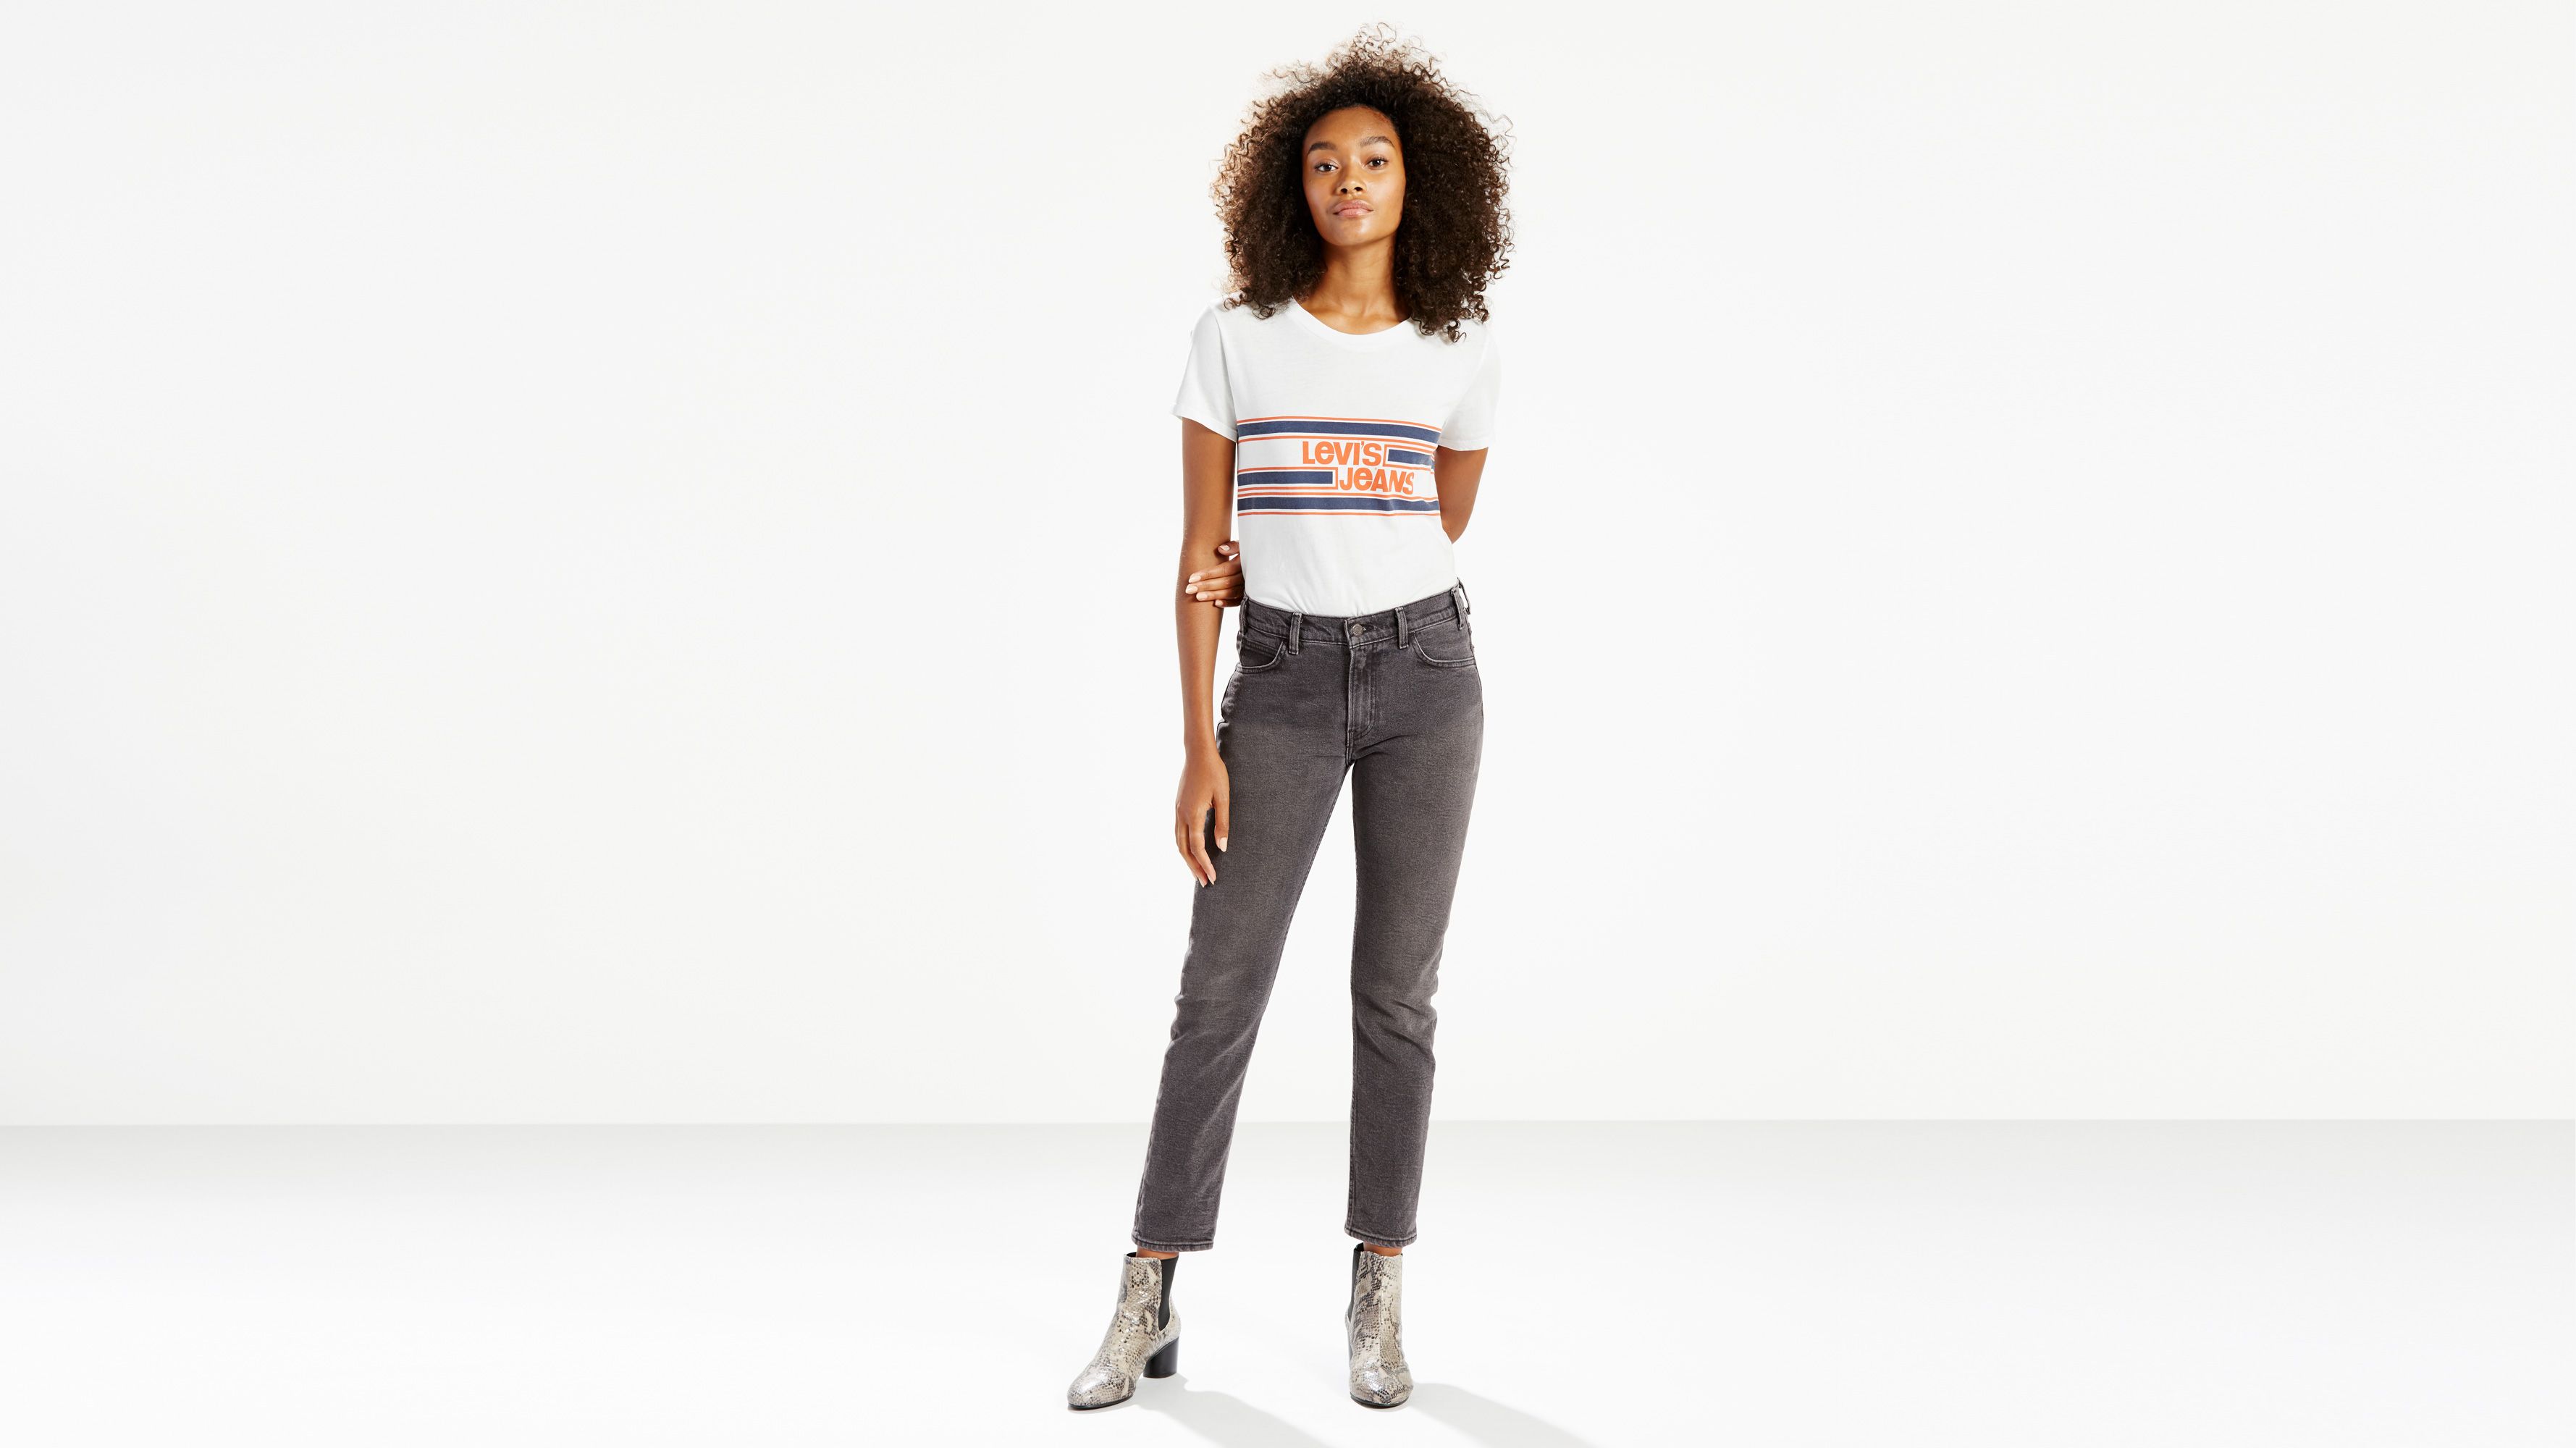 levi's 505c cropped jeans